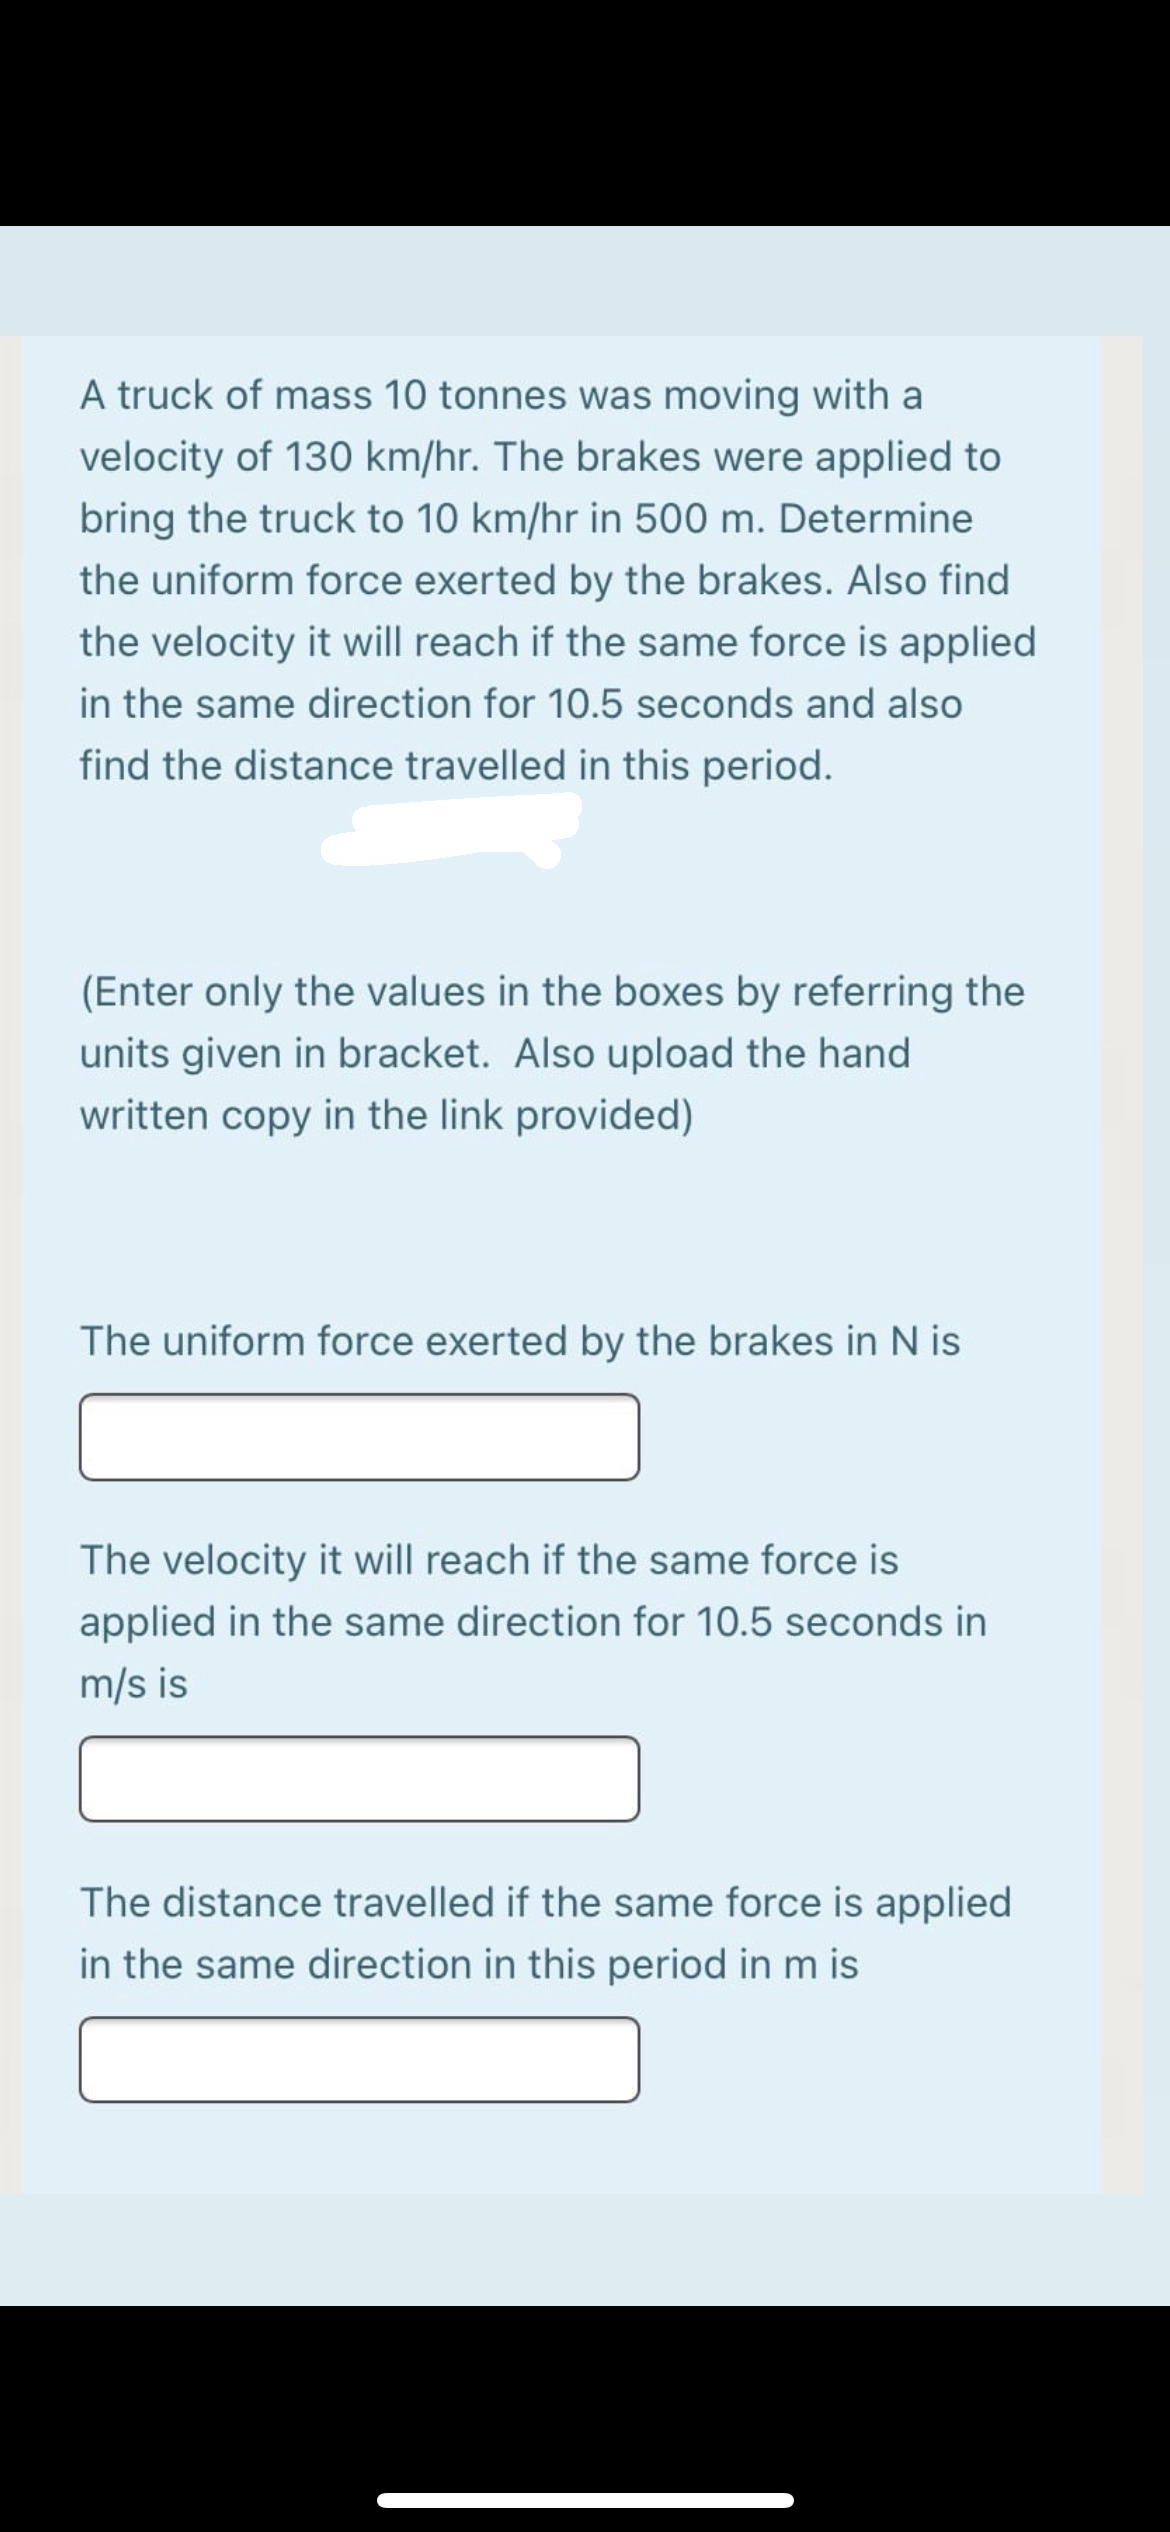 A truck of mass 10 tonnes was moving with a
velocity of 130 km/hr. The brakes were applied to
bring the truck to 10 km/hr in 500 m. Determine
the uniform force exerted by the brakes. Also find
the velocity it will reach if the same force is applied
in the same direction for 10.5 seconds and also
find the distance travelled in this period.
(Enter only the values in the boxes by referring the
units given in bracket. Also upload the hand
written copy in the link provided)
The uniform force exerted by the brakes in N is
The velocity it will reach if the same force is
applied in the same direction for 10.5 seconds in
m/s is
The distance travelled if the same force is applied
in the same direction in this period in m is
